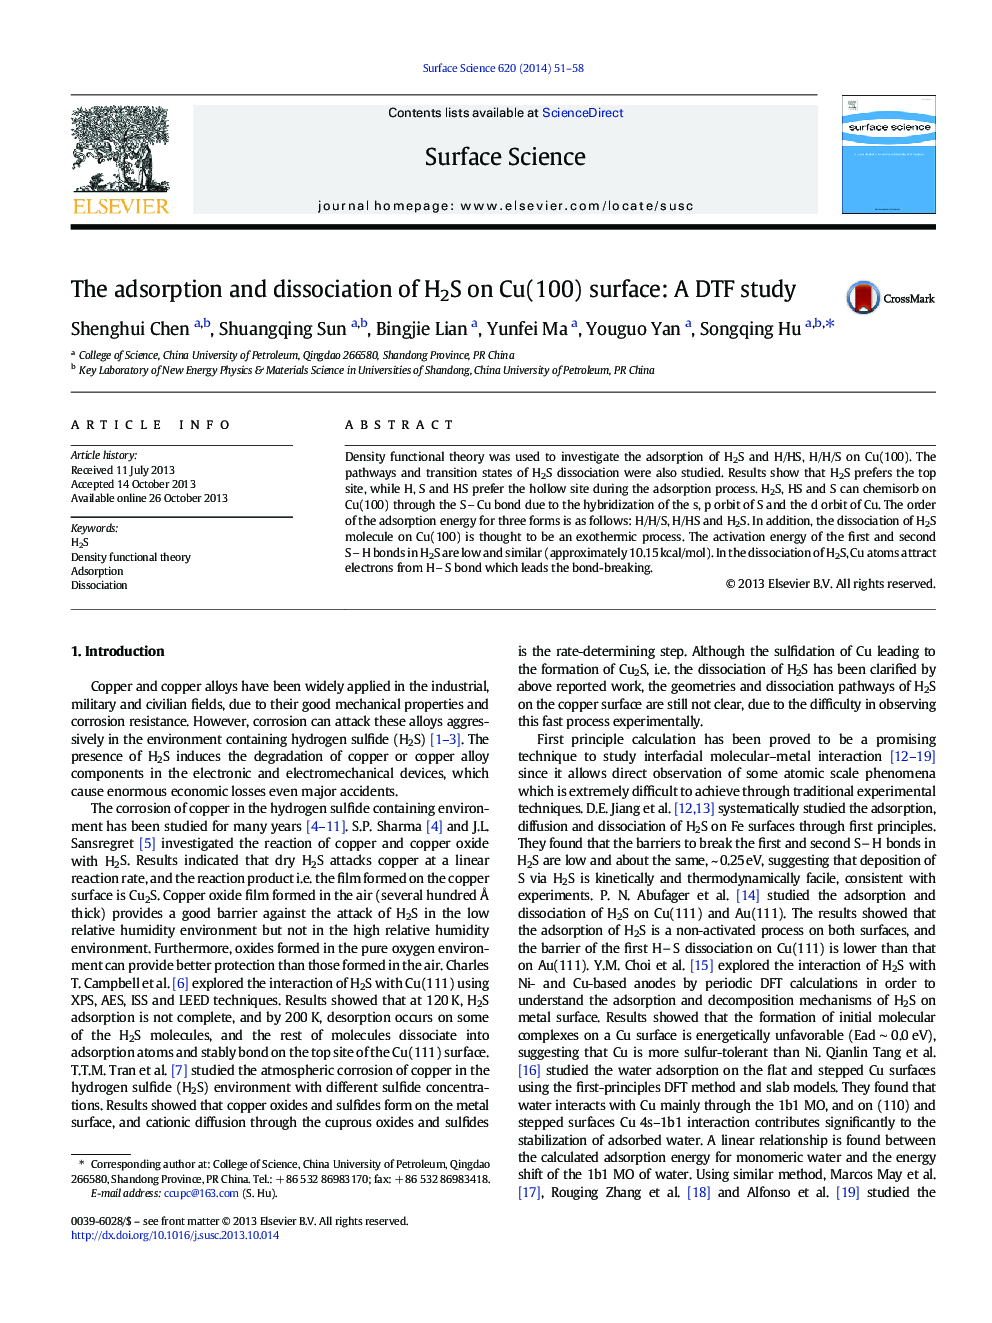 The adsorption and dissociation of H2S on Cu(100) surface: A DTF study